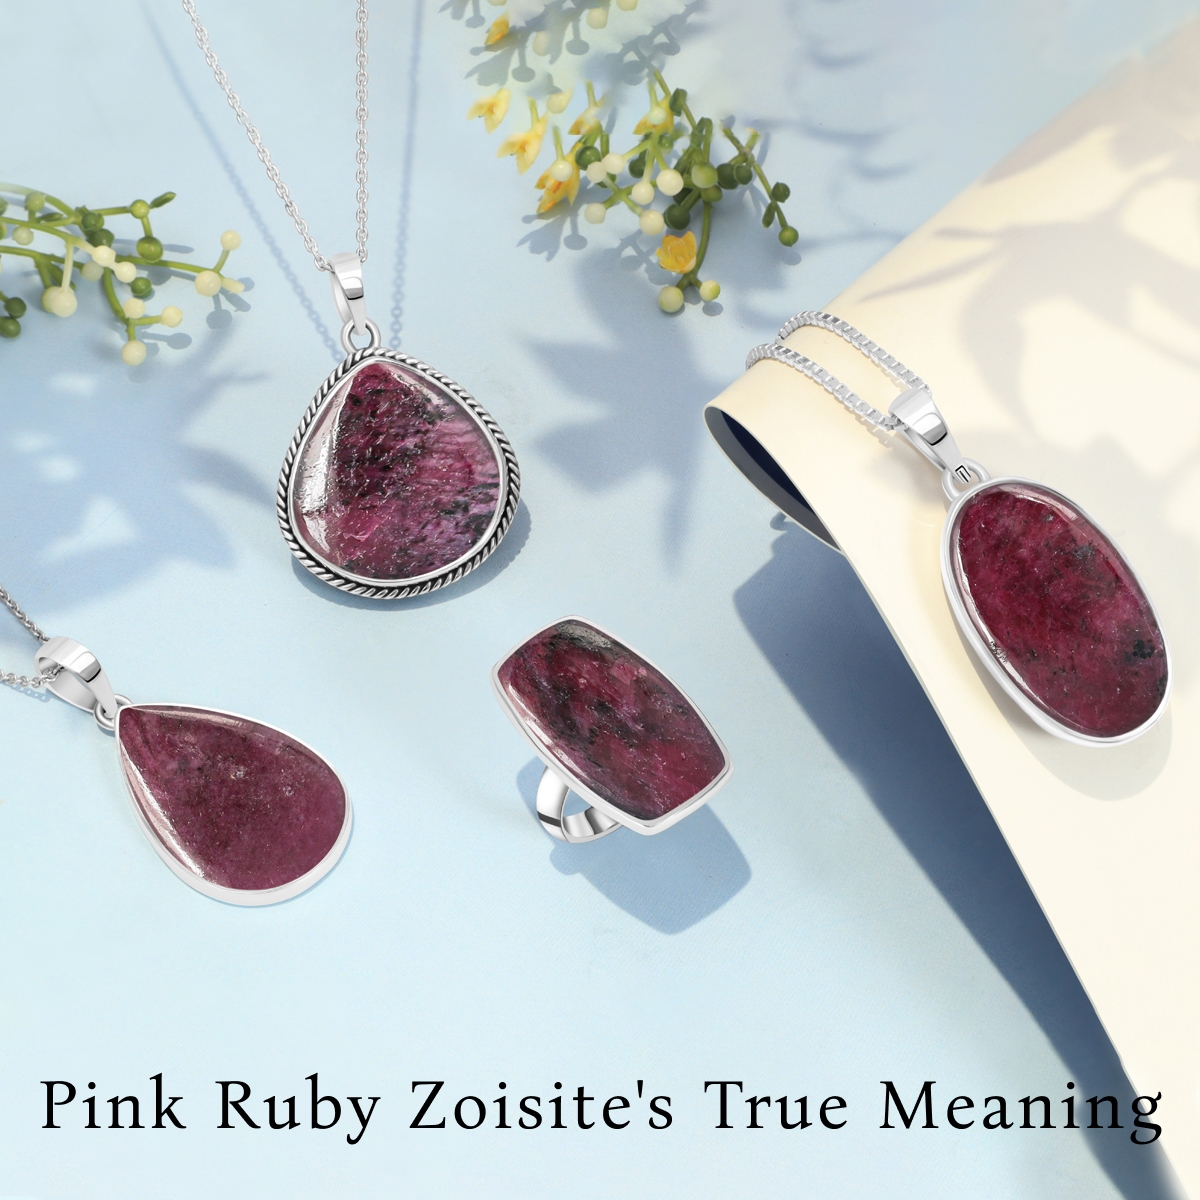 Pink Ruby Zoisite Meaning